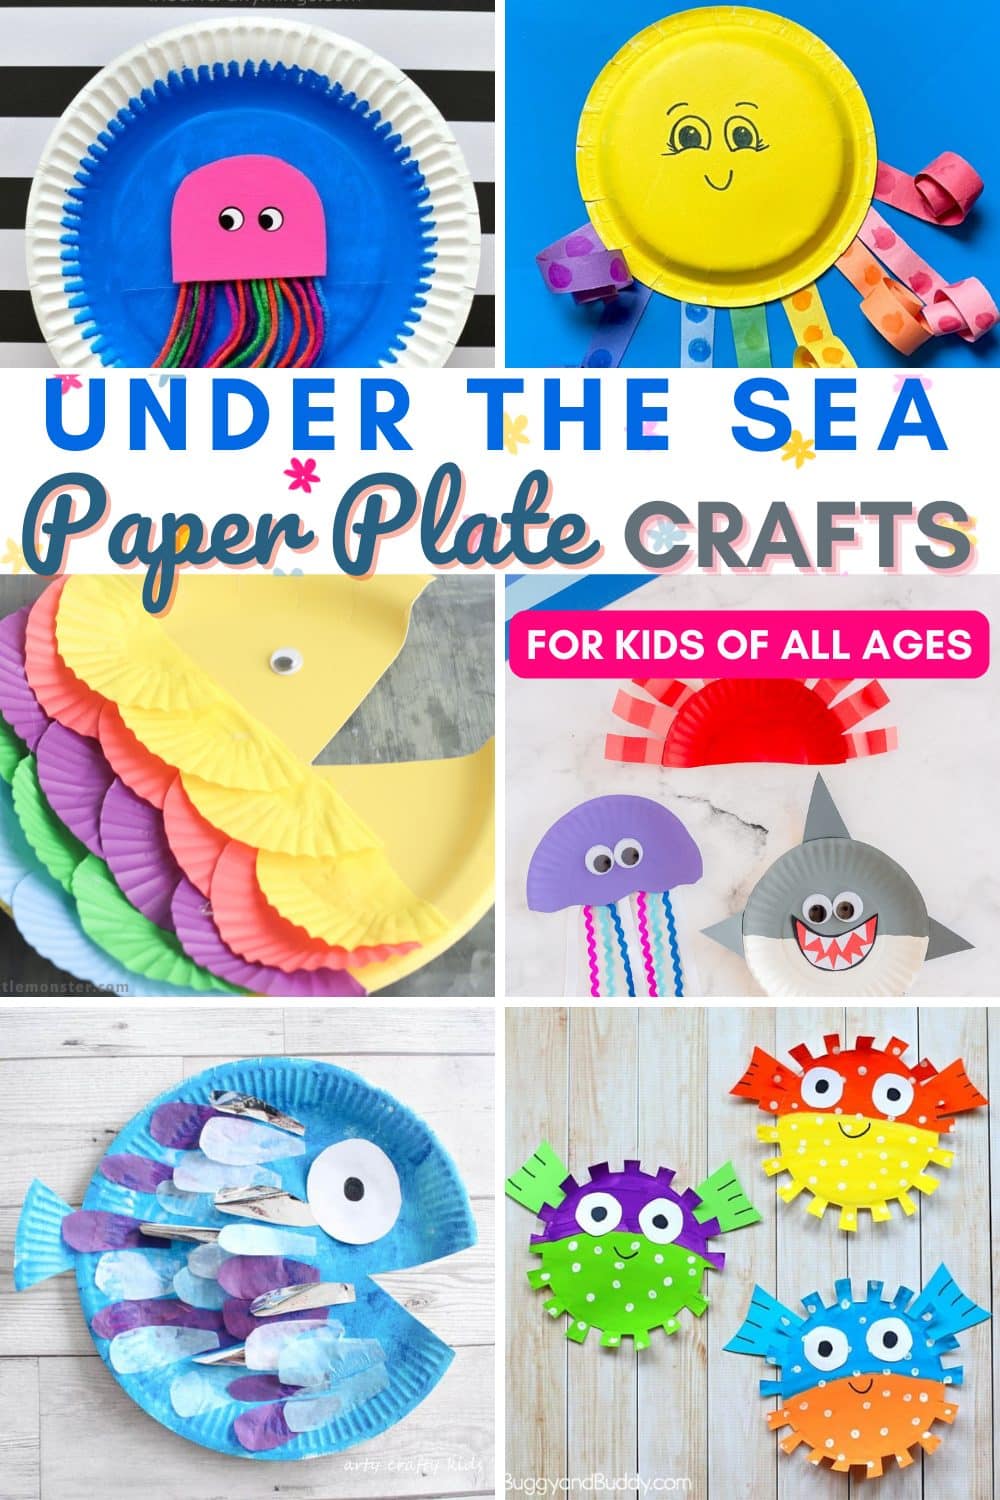 35 Fun Paper Plate Crafts for Kids of All Ages - The Girl Creative